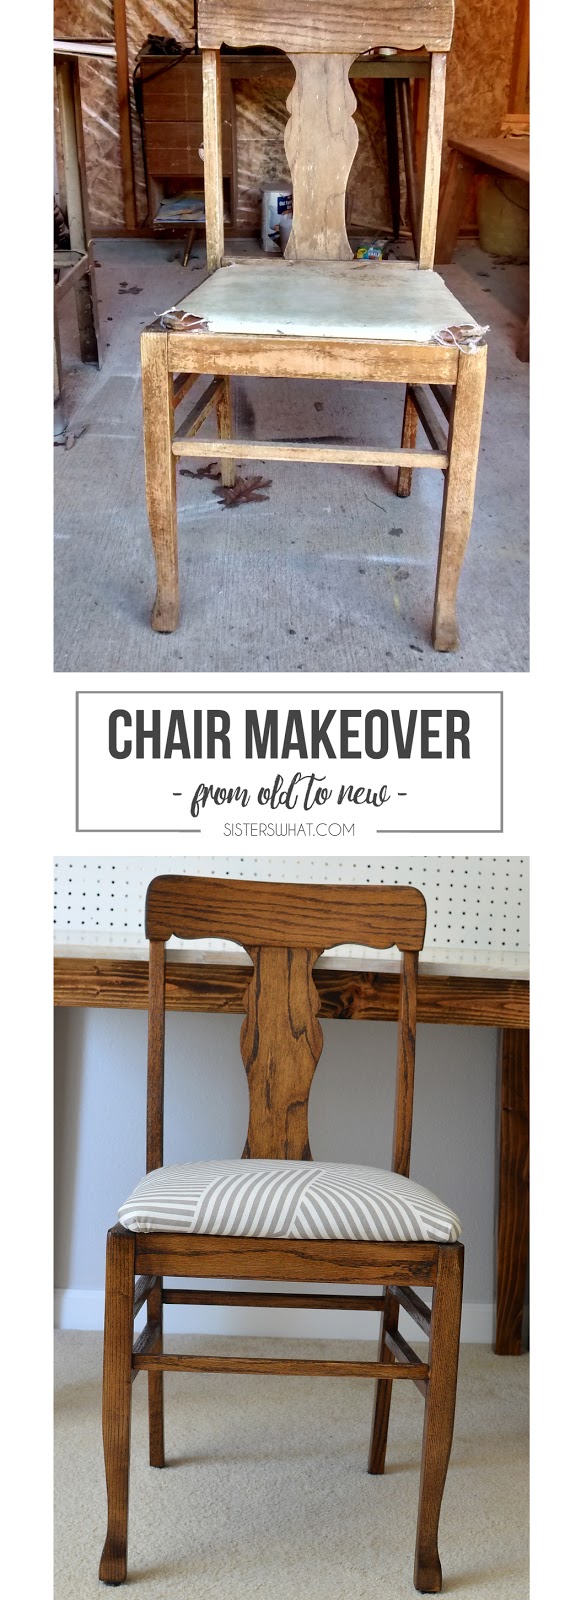 Sincerely, Kinsey: Wooden Chair Makeover // DIY  Wooden chair makeover,  Diy chair makeover, Diy chair